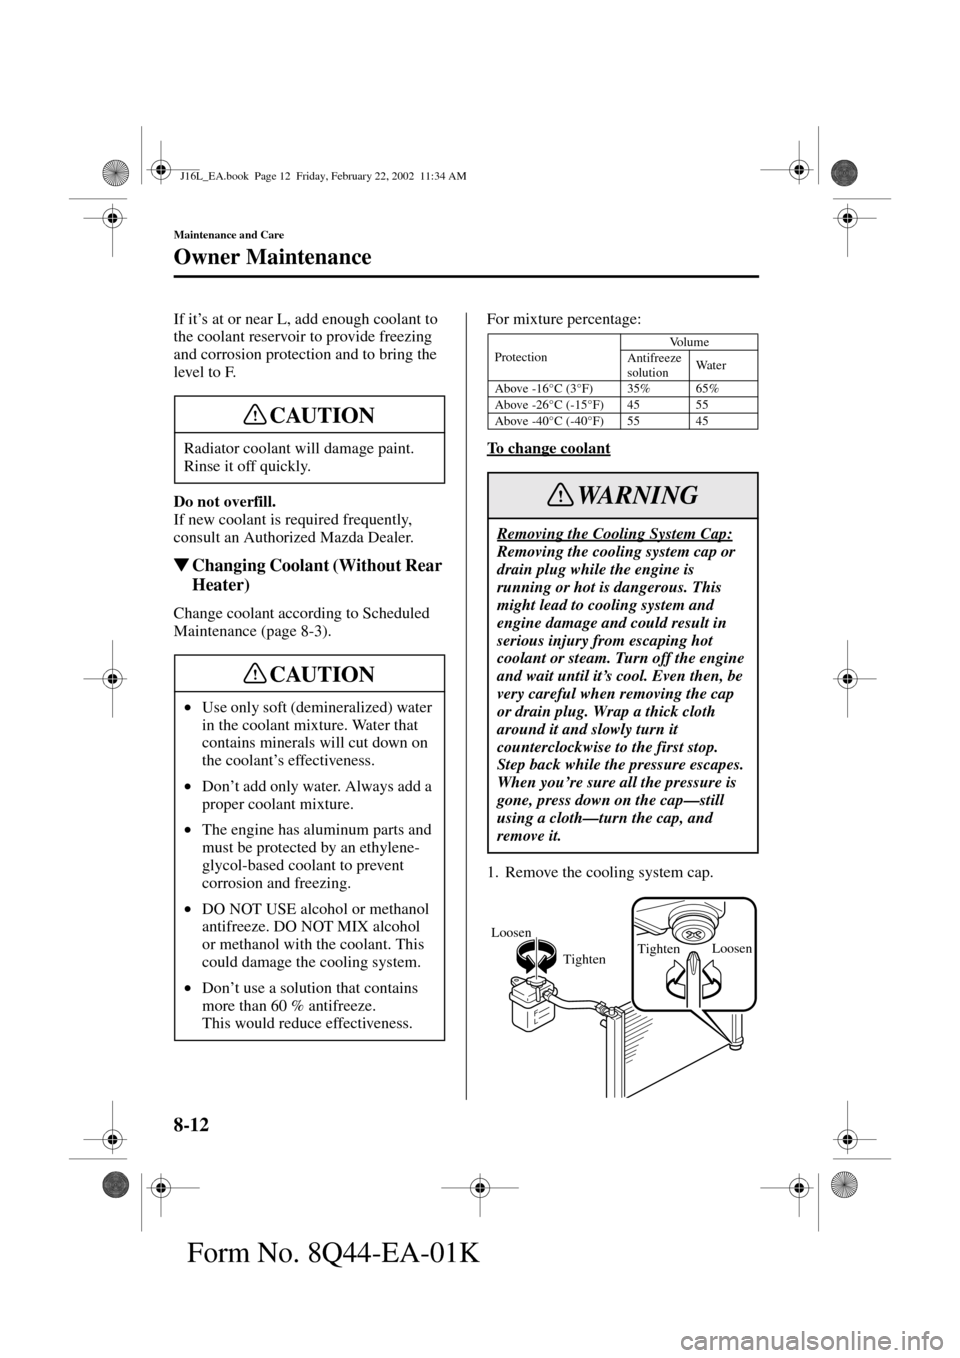 MAZDA MODEL MPV 2002  Owners Manual (in English) 8-12
Maintenance and Care
Owner Maintenance
Form No. 8Q44-EA-01K
If it’s at or near L, add enough coolant to 
the coolant reservoir to provide freezing 
and corrosion protection and to bring the 
le